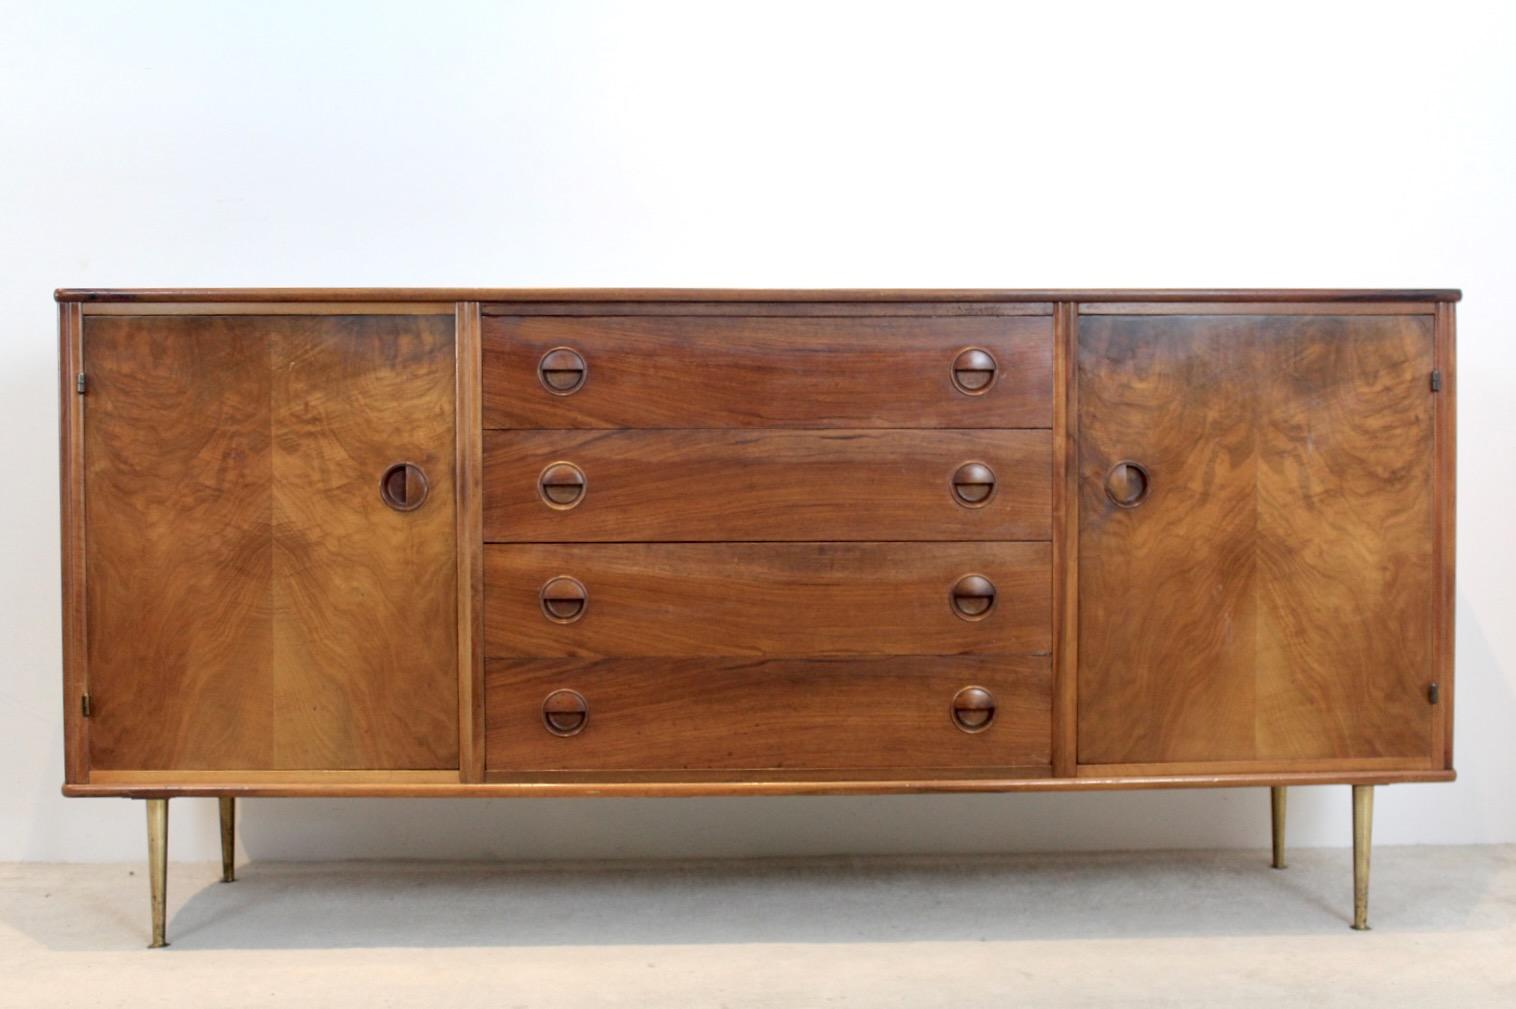 Stunning Walnut sideboard designed by William Watting and produced by Fristho Modernart Denmark in 1955. This piece was part of the 'Modern Art' collection and brought a Scandinavian influence to the Dutch company. William Watting is a US designer